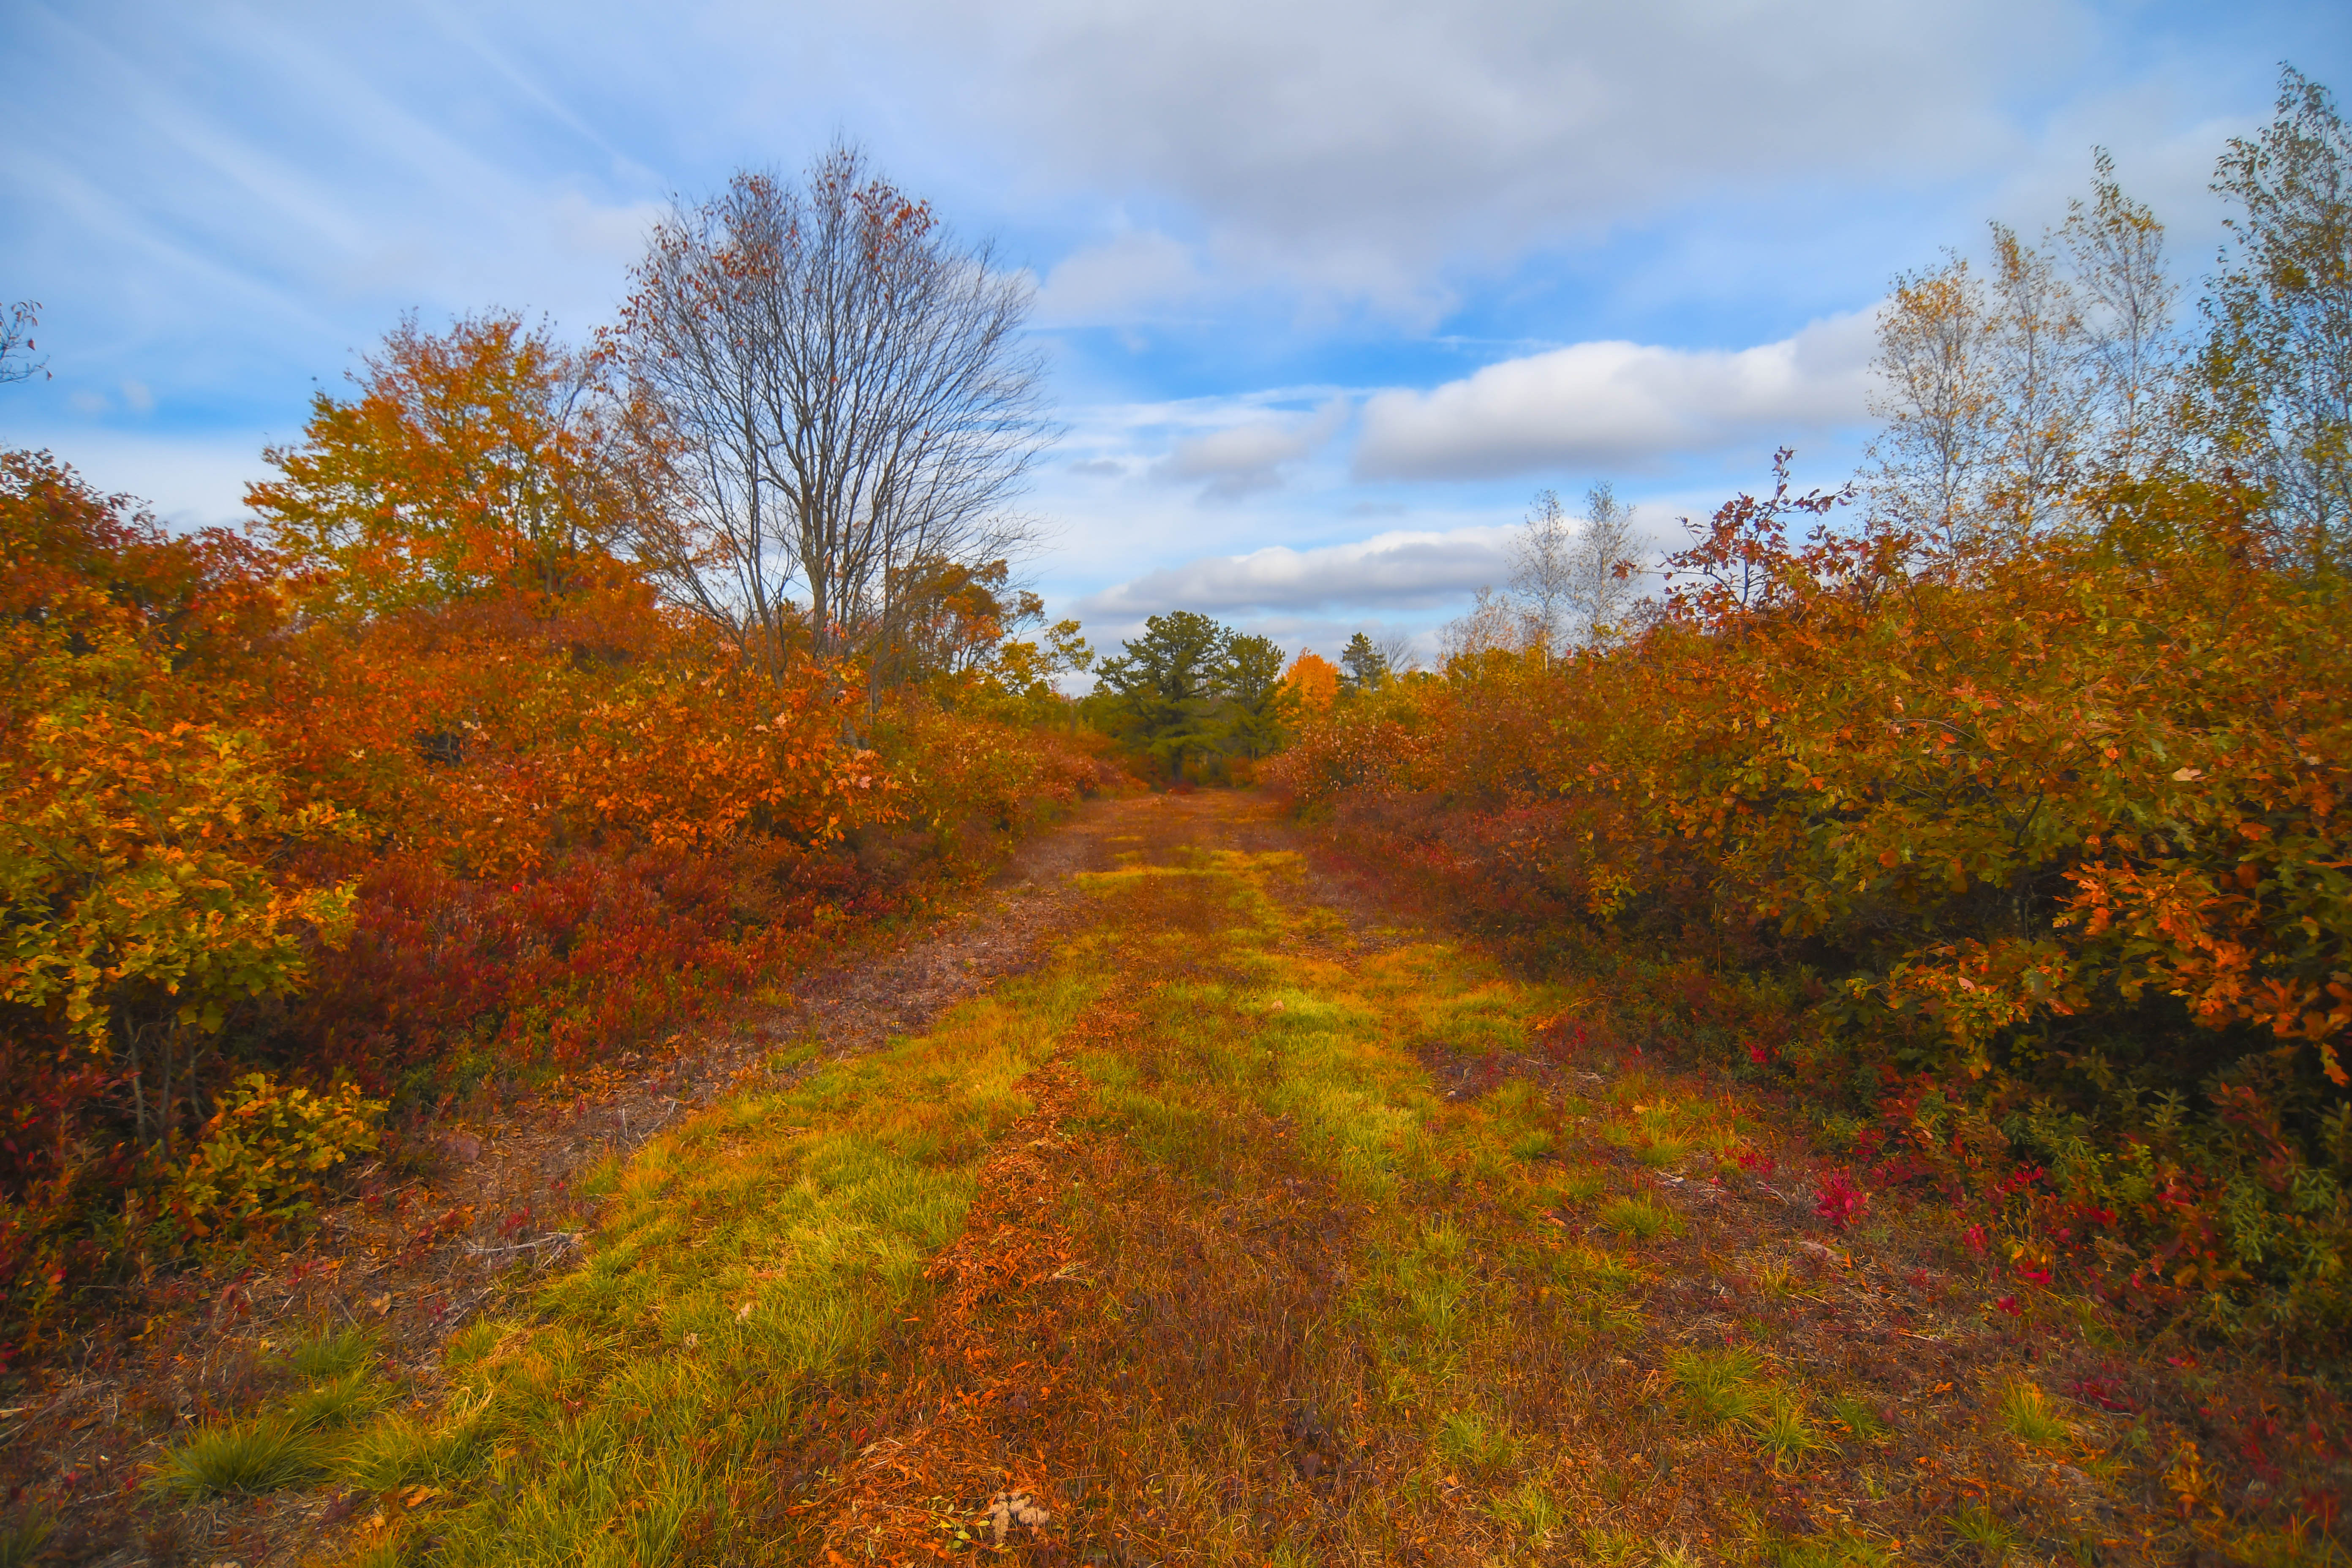 A cleared path cuts through a field dense with orange, yellow, and red fall colored growth.